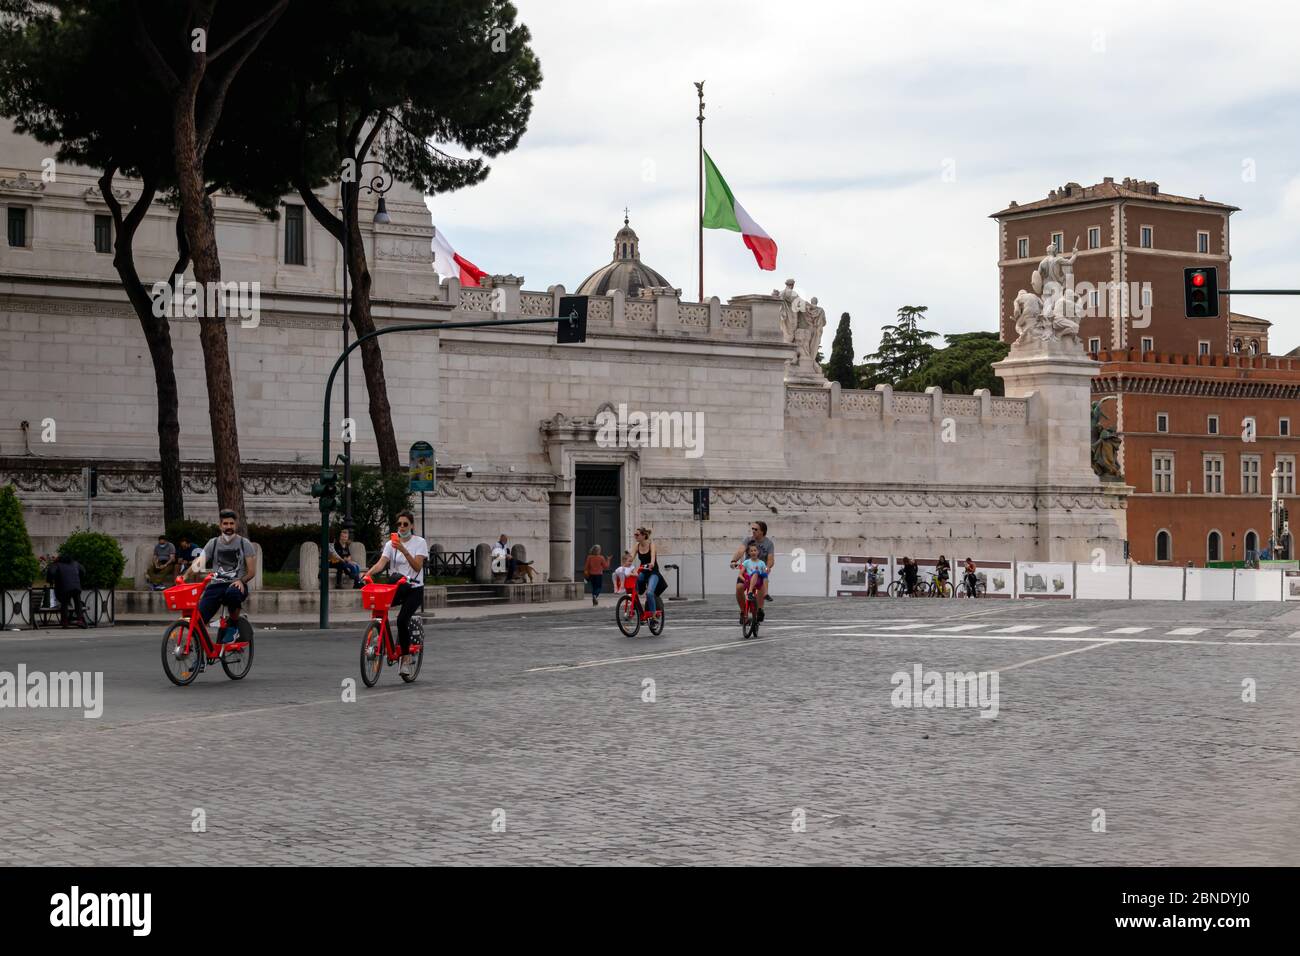 Rome, Italy - May 10, 2020: Viale dei Fori Imperiali, first exit of citizens after the end of the restrictions for the Covid-19 pandemic. People strol Stock Photo